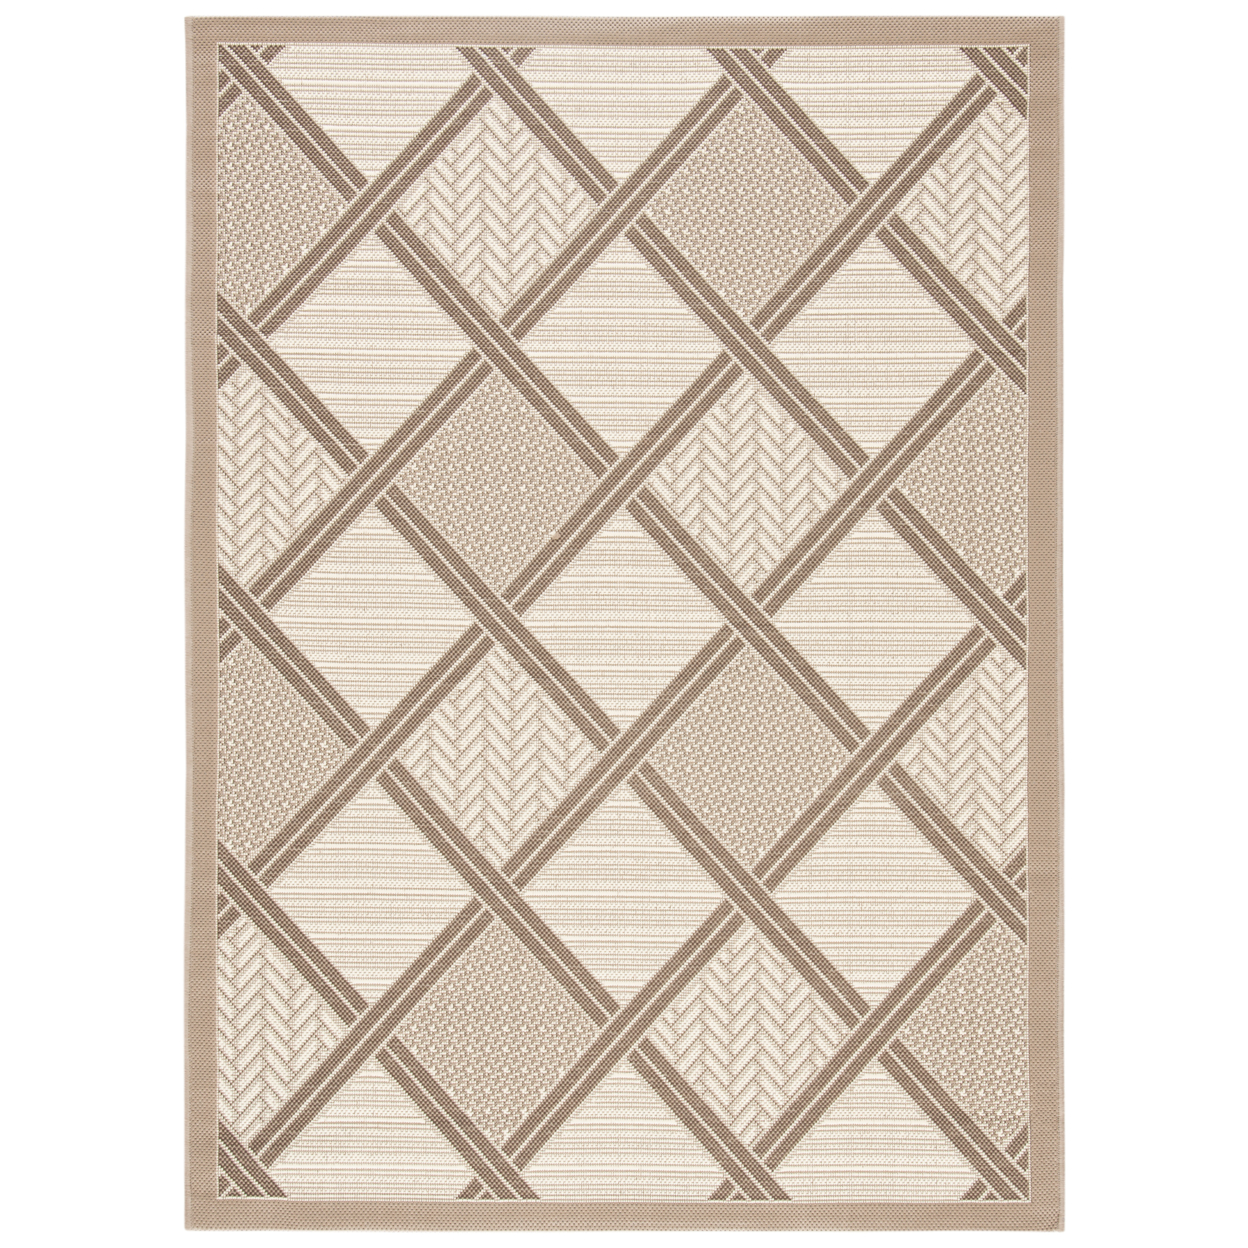 SAFAVIEH Outdoor CY7570-79A7 Courtyard Collection Beige Rug - 4' X 5' 7